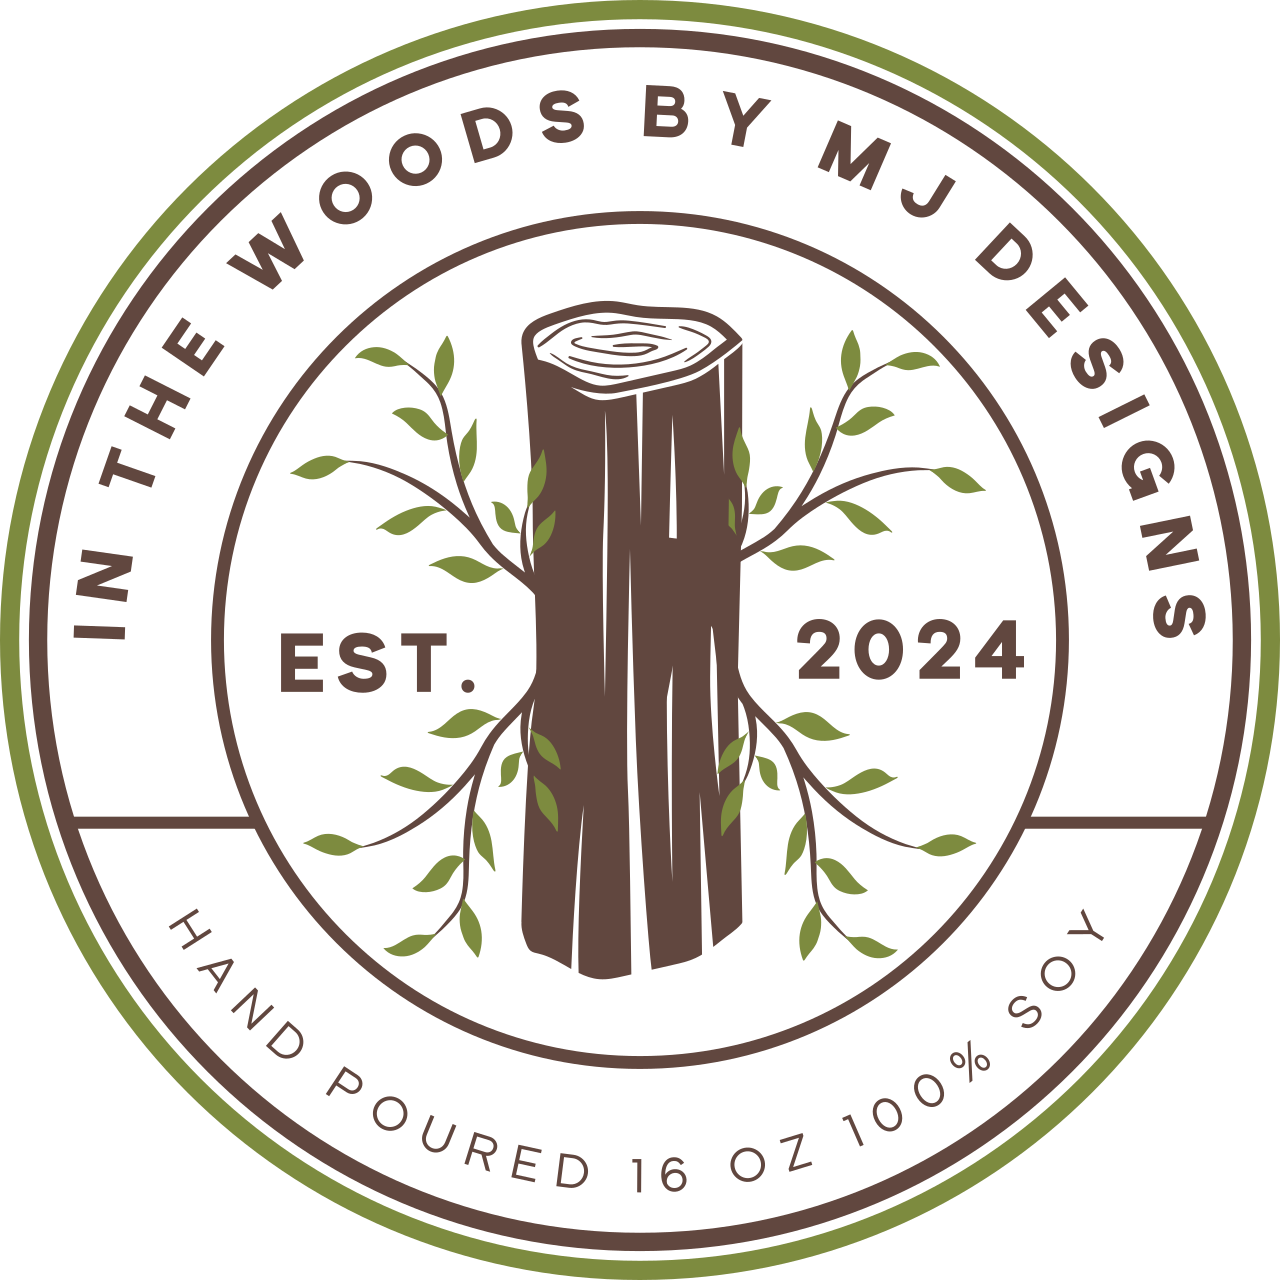 In The Woods by MJ Designs's logo